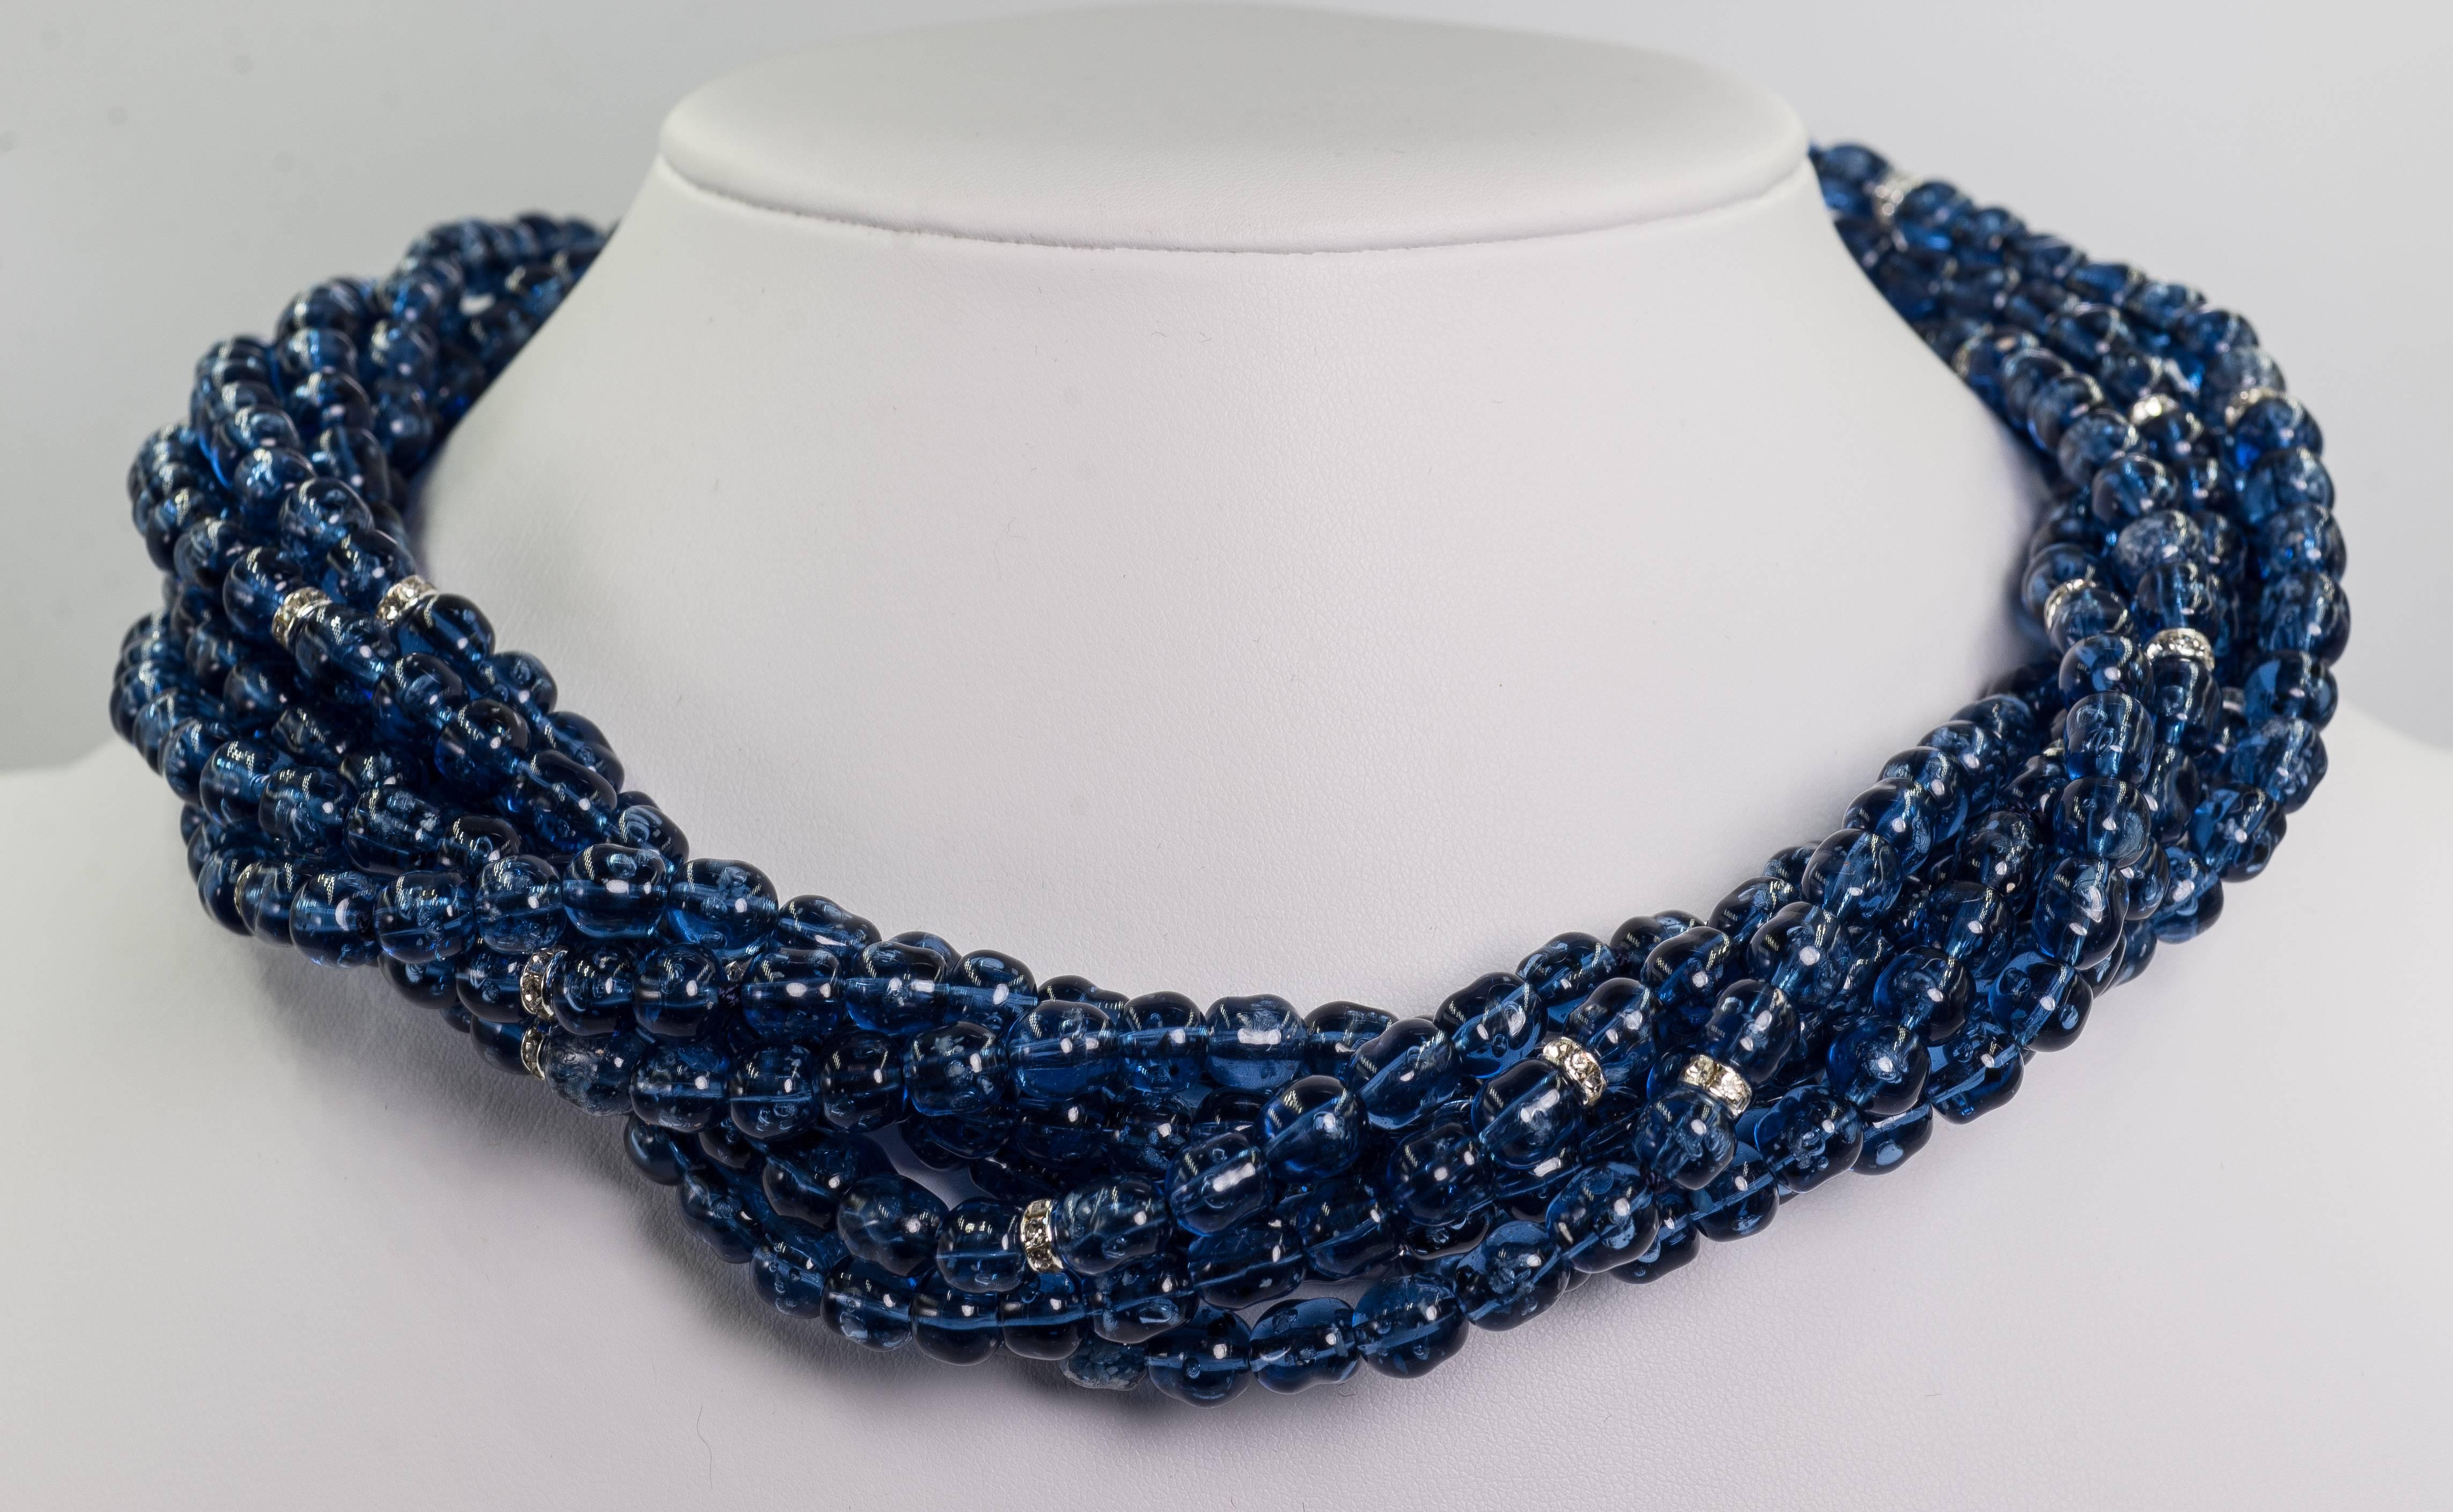 Vintage Bergdorf Chic Faux Sapphire crystal rondel  bead twist collar necklace attached to an amazing unique zircon set sterling clasp that alone measures 4 inches long.
The necklace measure 18'' fully twisted but can be worn longer. It's thickness